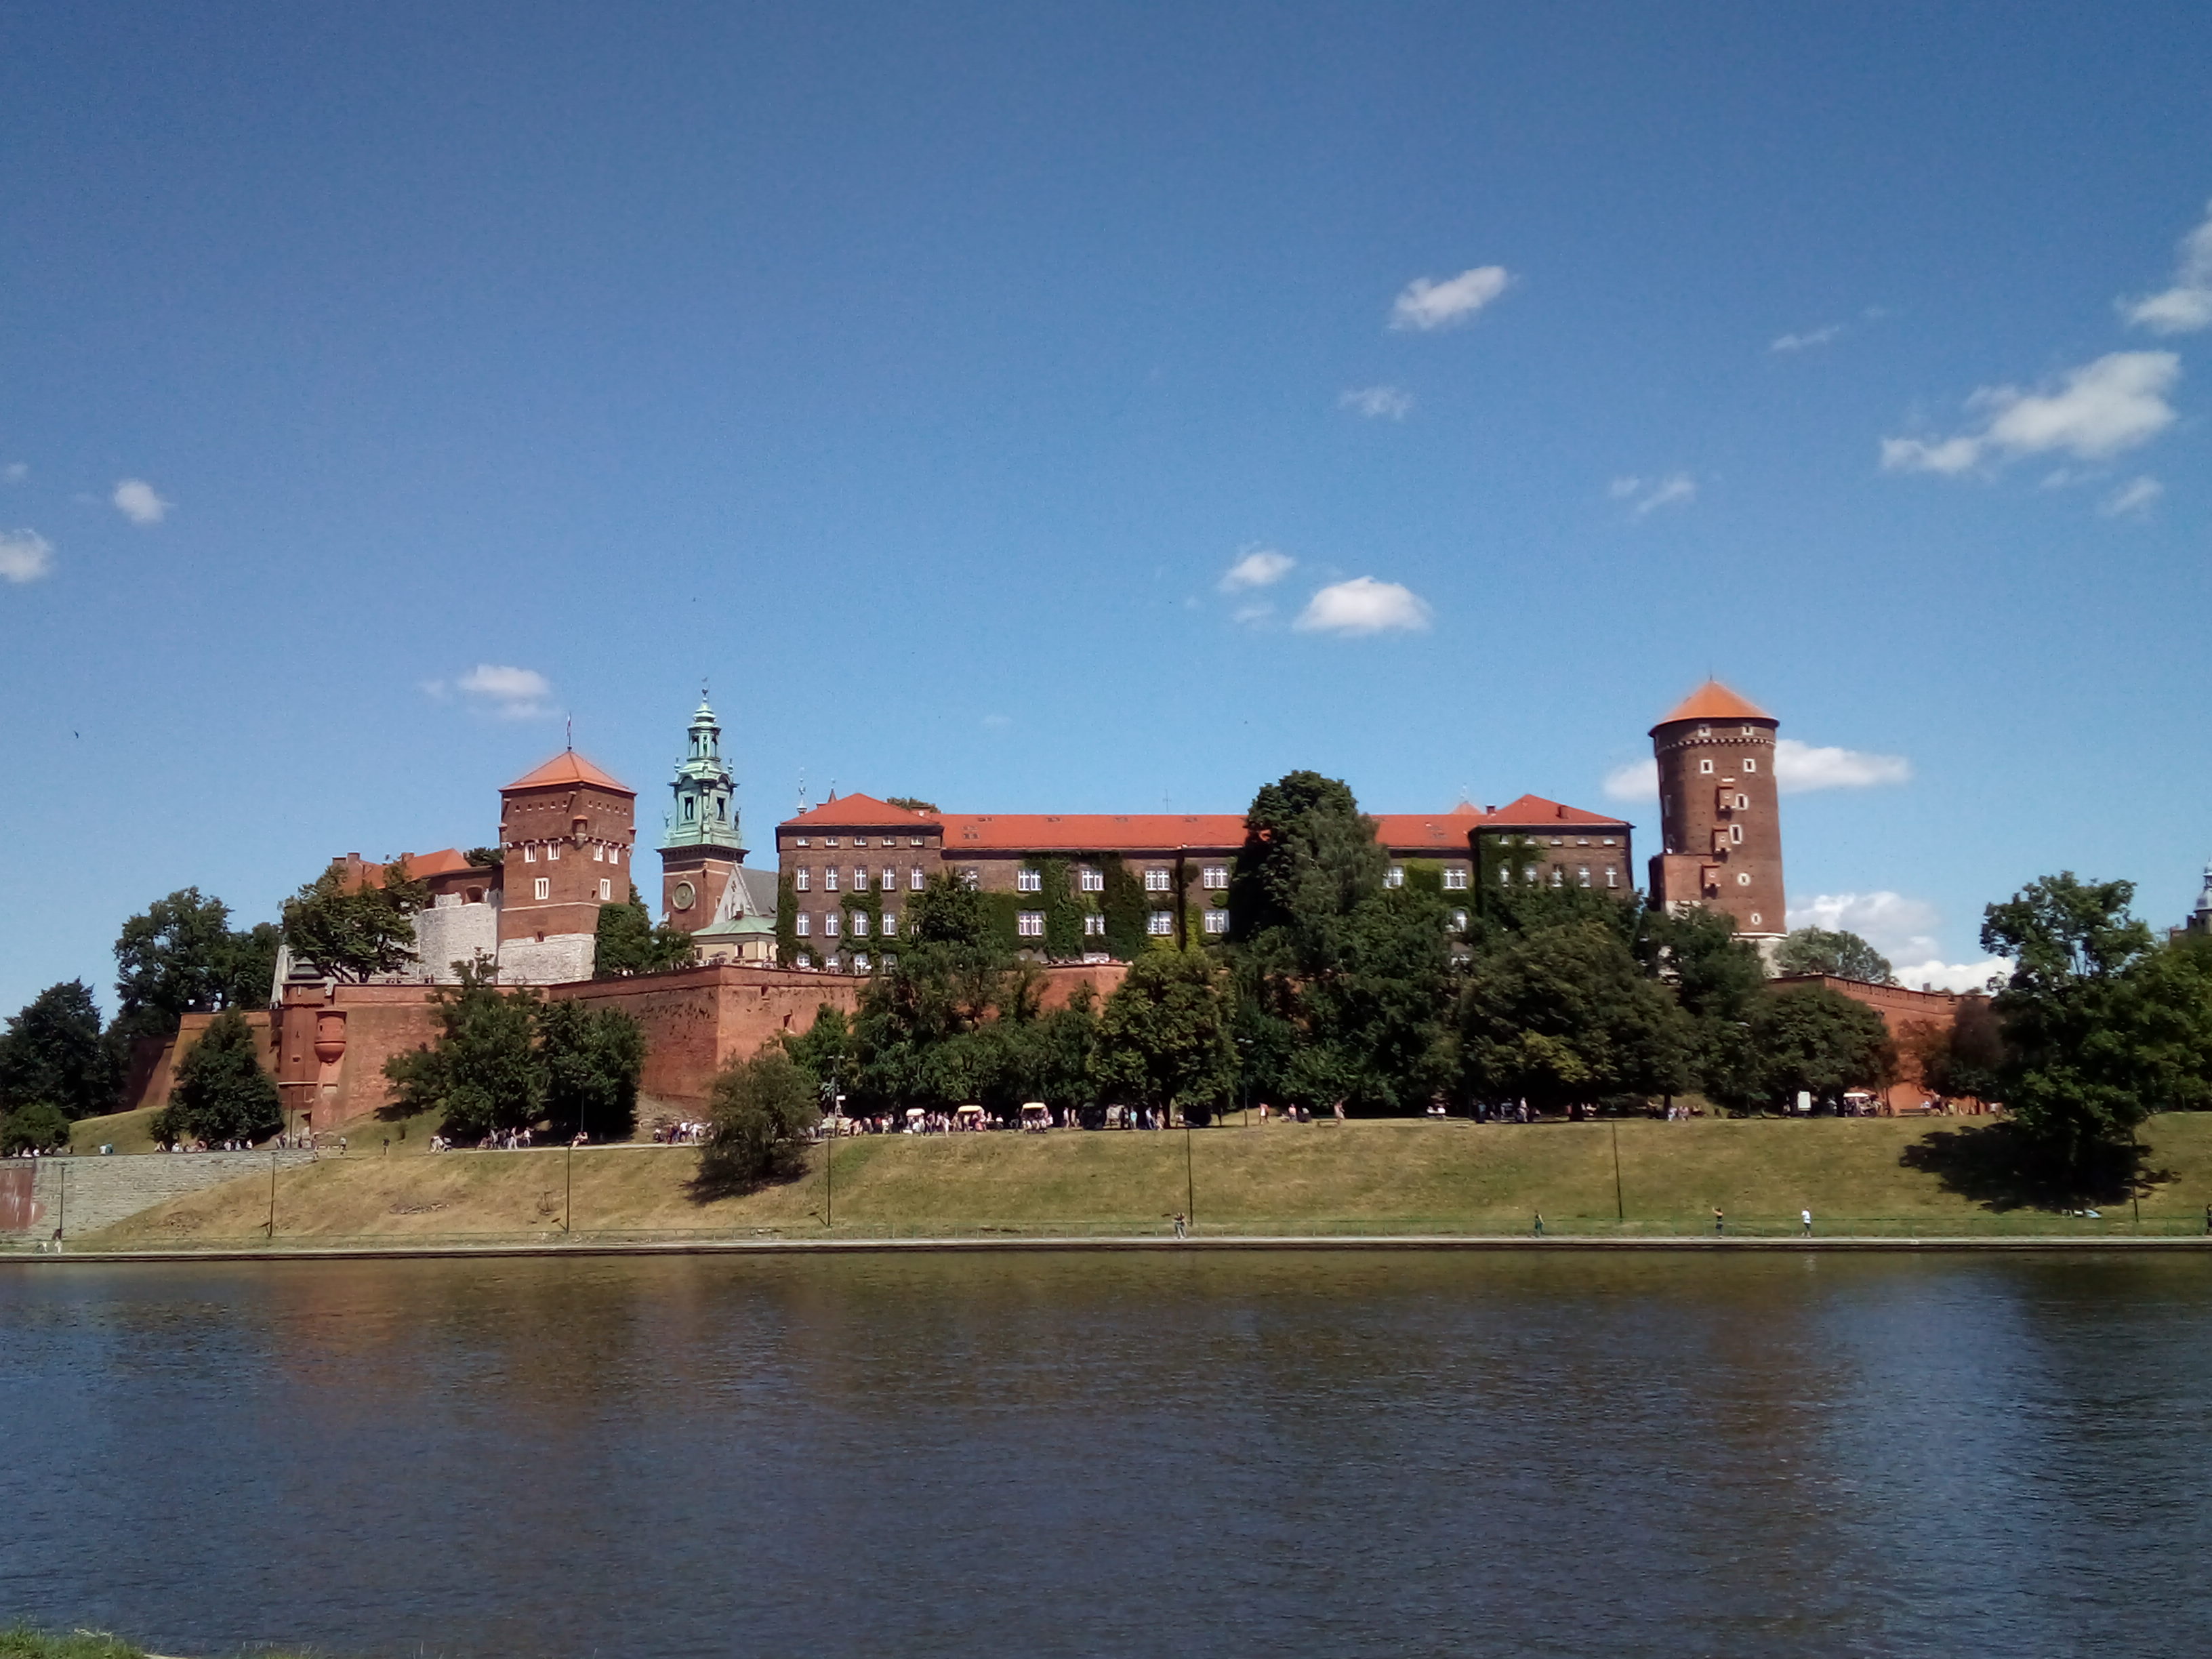 Wawel in Kraków, from the other side of the river